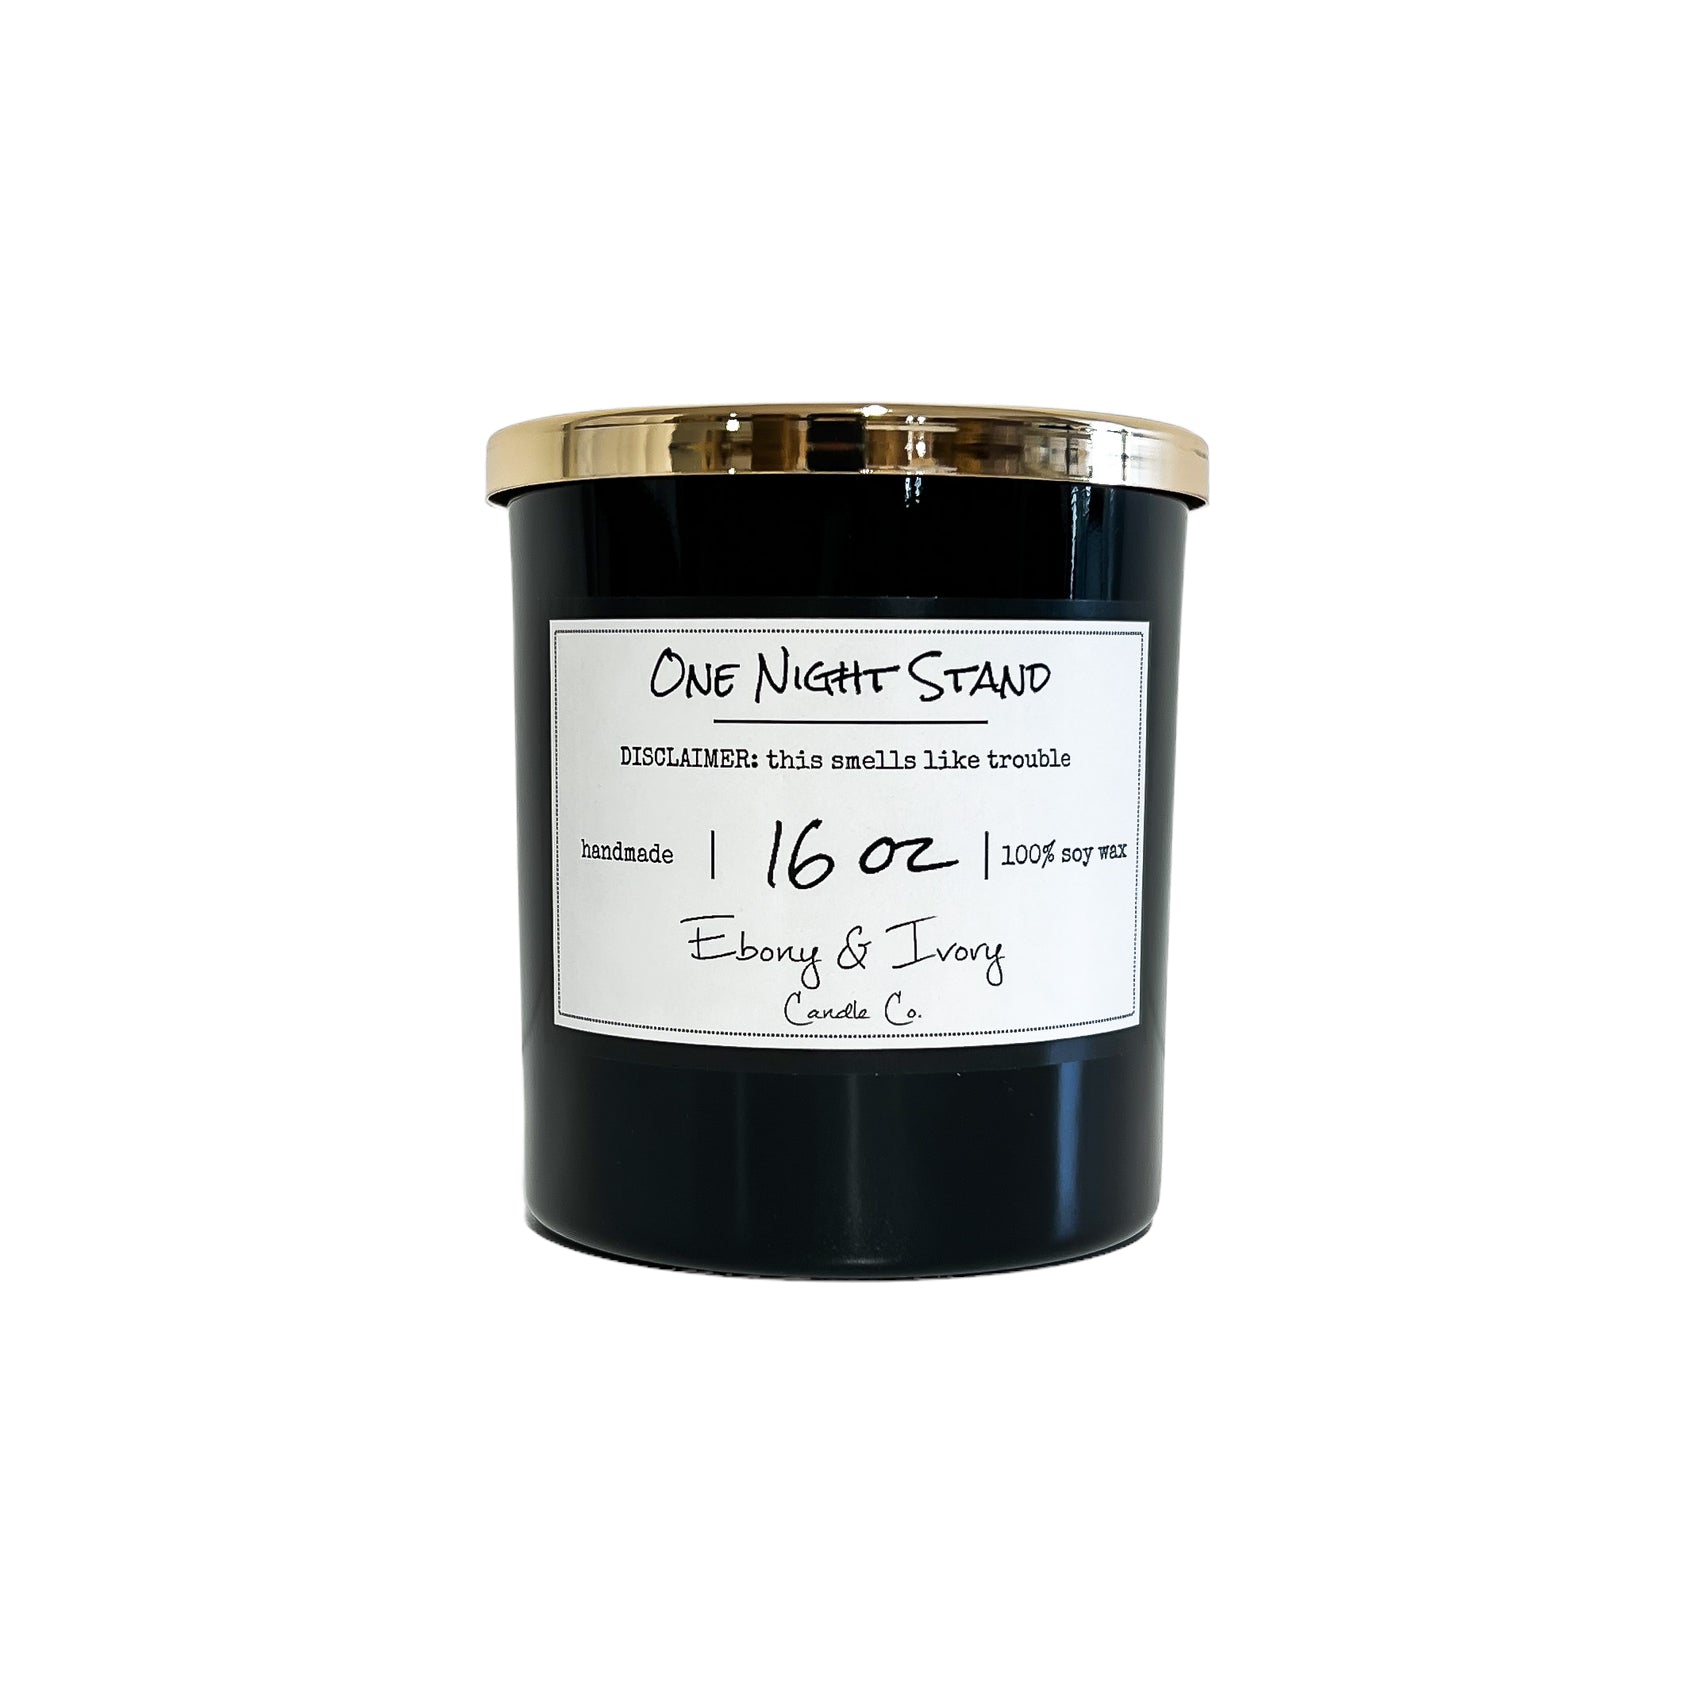 Black, sixteen ounce, mahogany and apples scented soy wax candle with a gold lid and a white label that reads One Night Stand